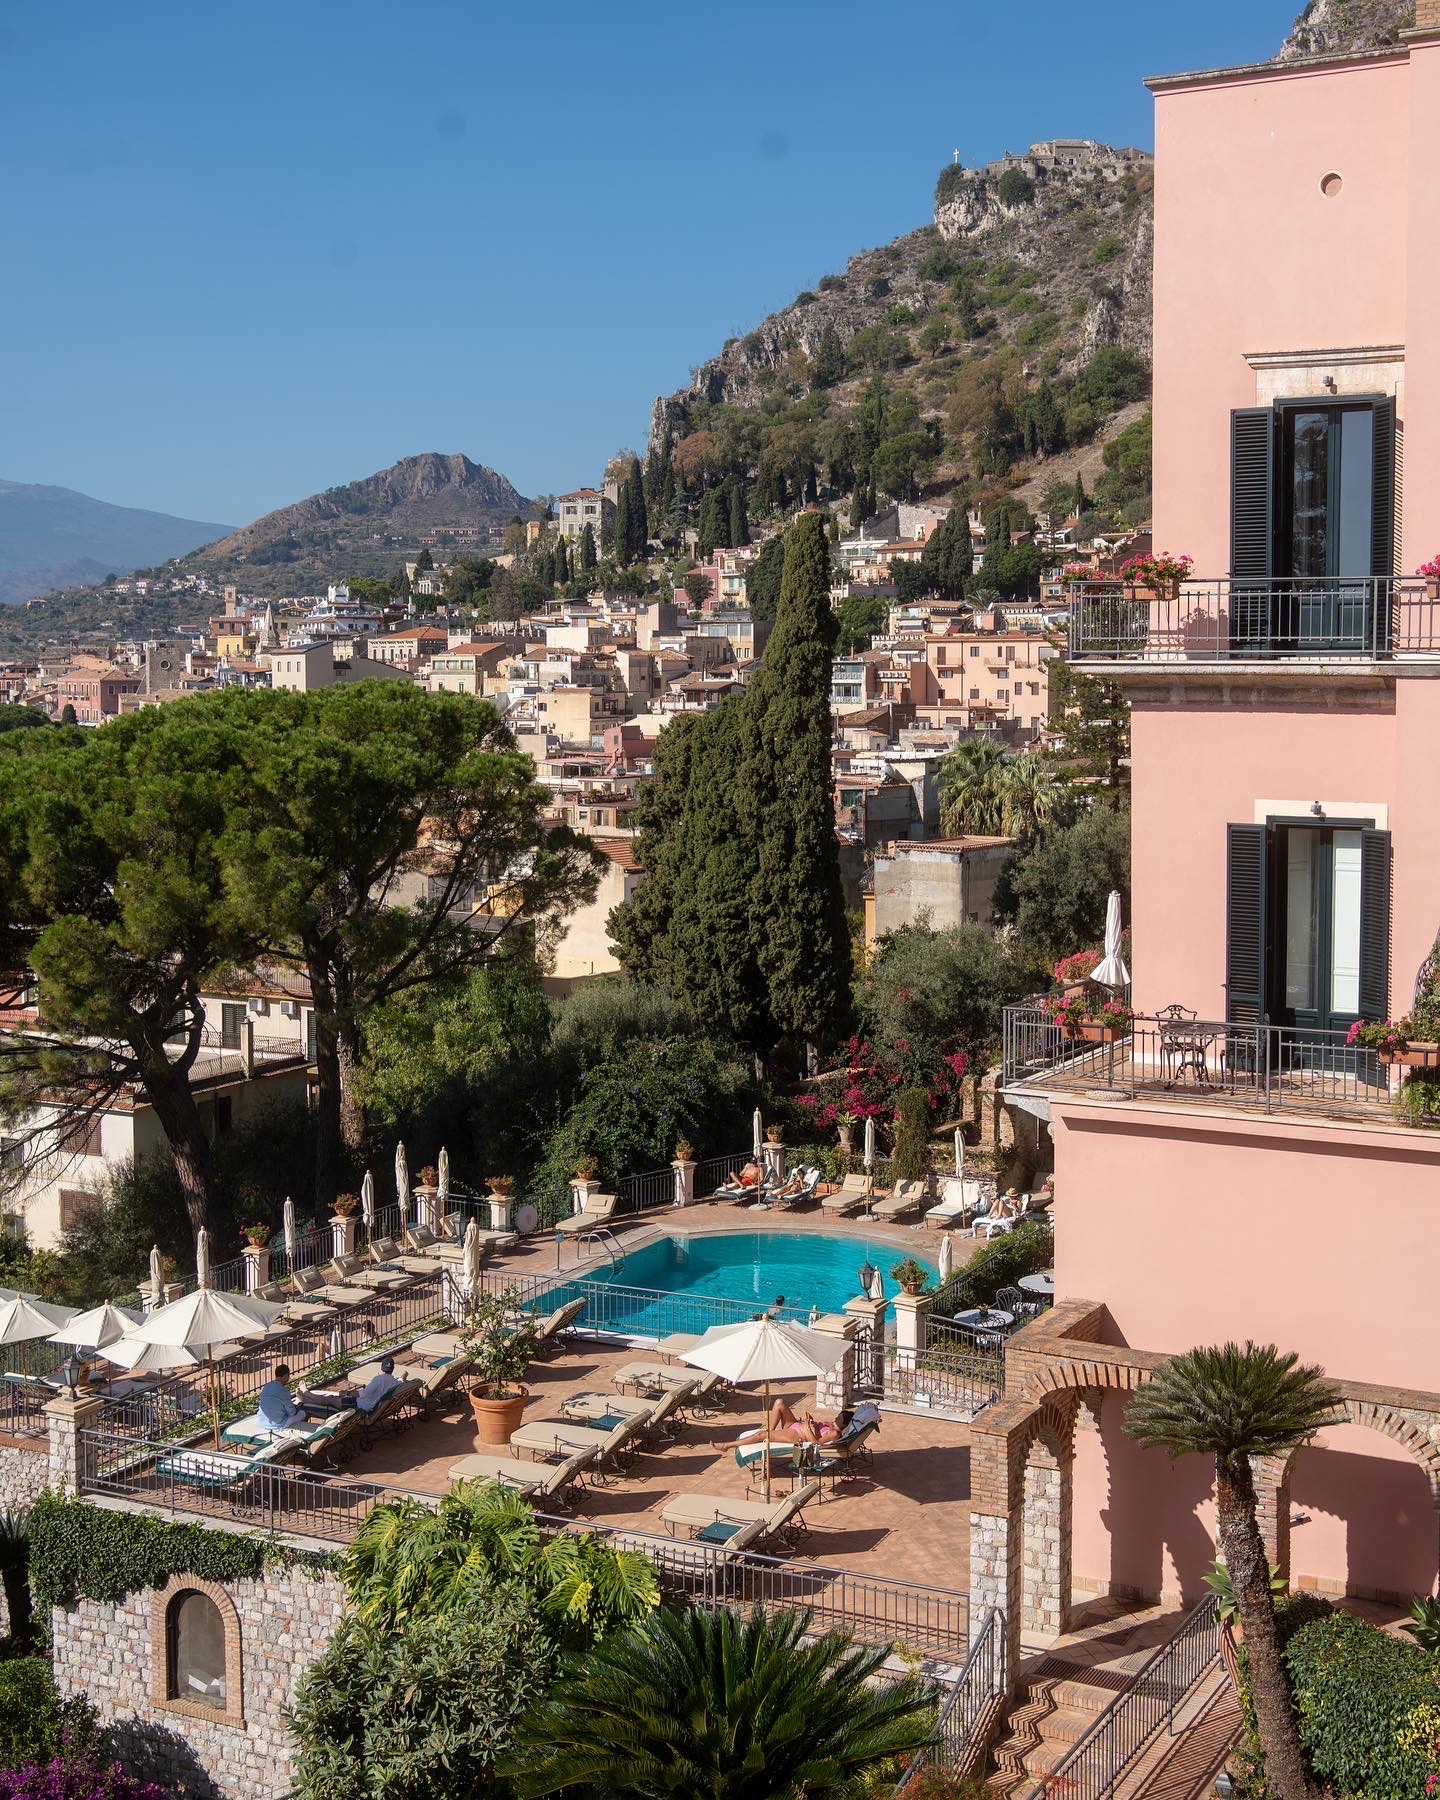 Louise Roe travels to Sicily, taormina